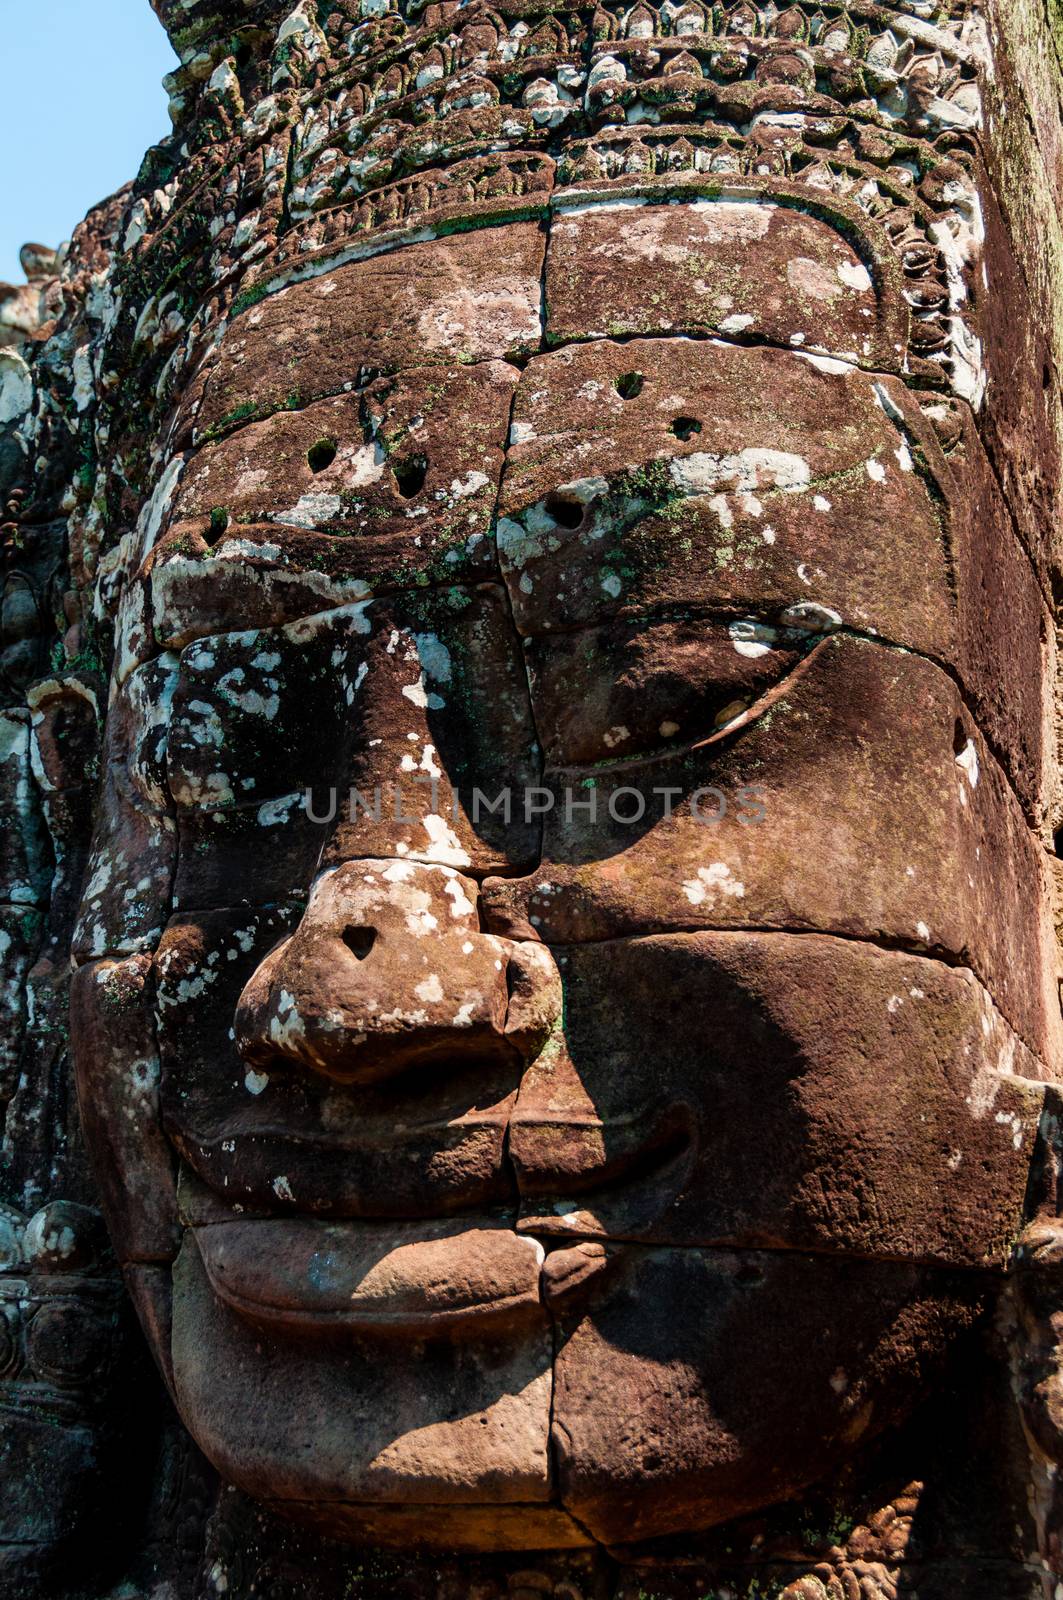 Head encarved in stone Bayon temple Angkor Wat Cambodia